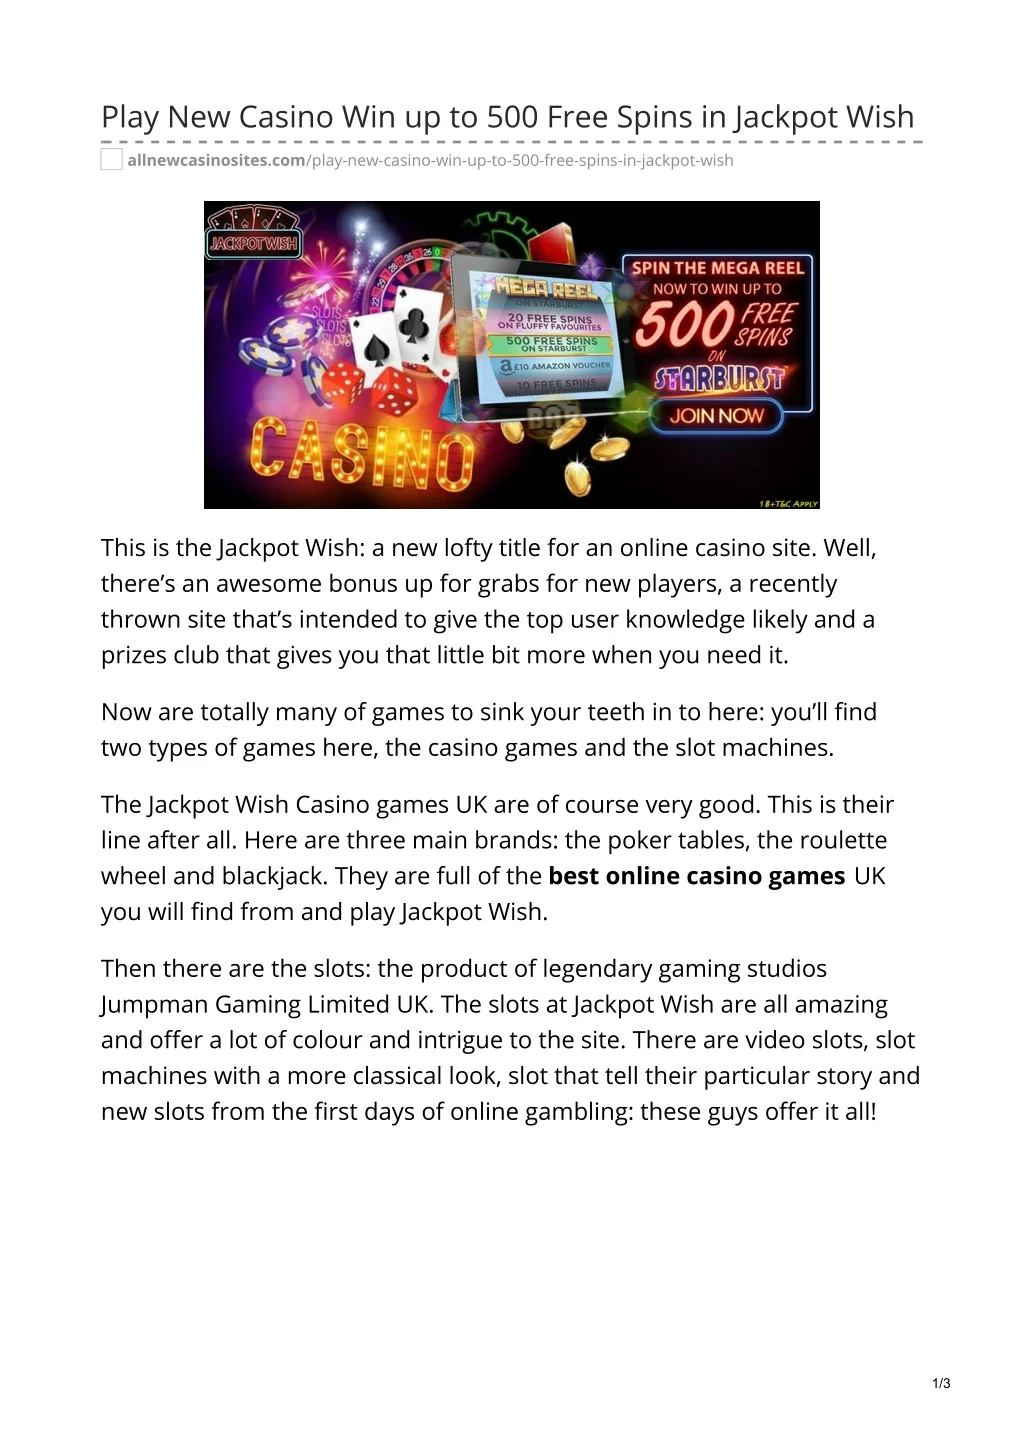 play new casino win up to 500 free spins